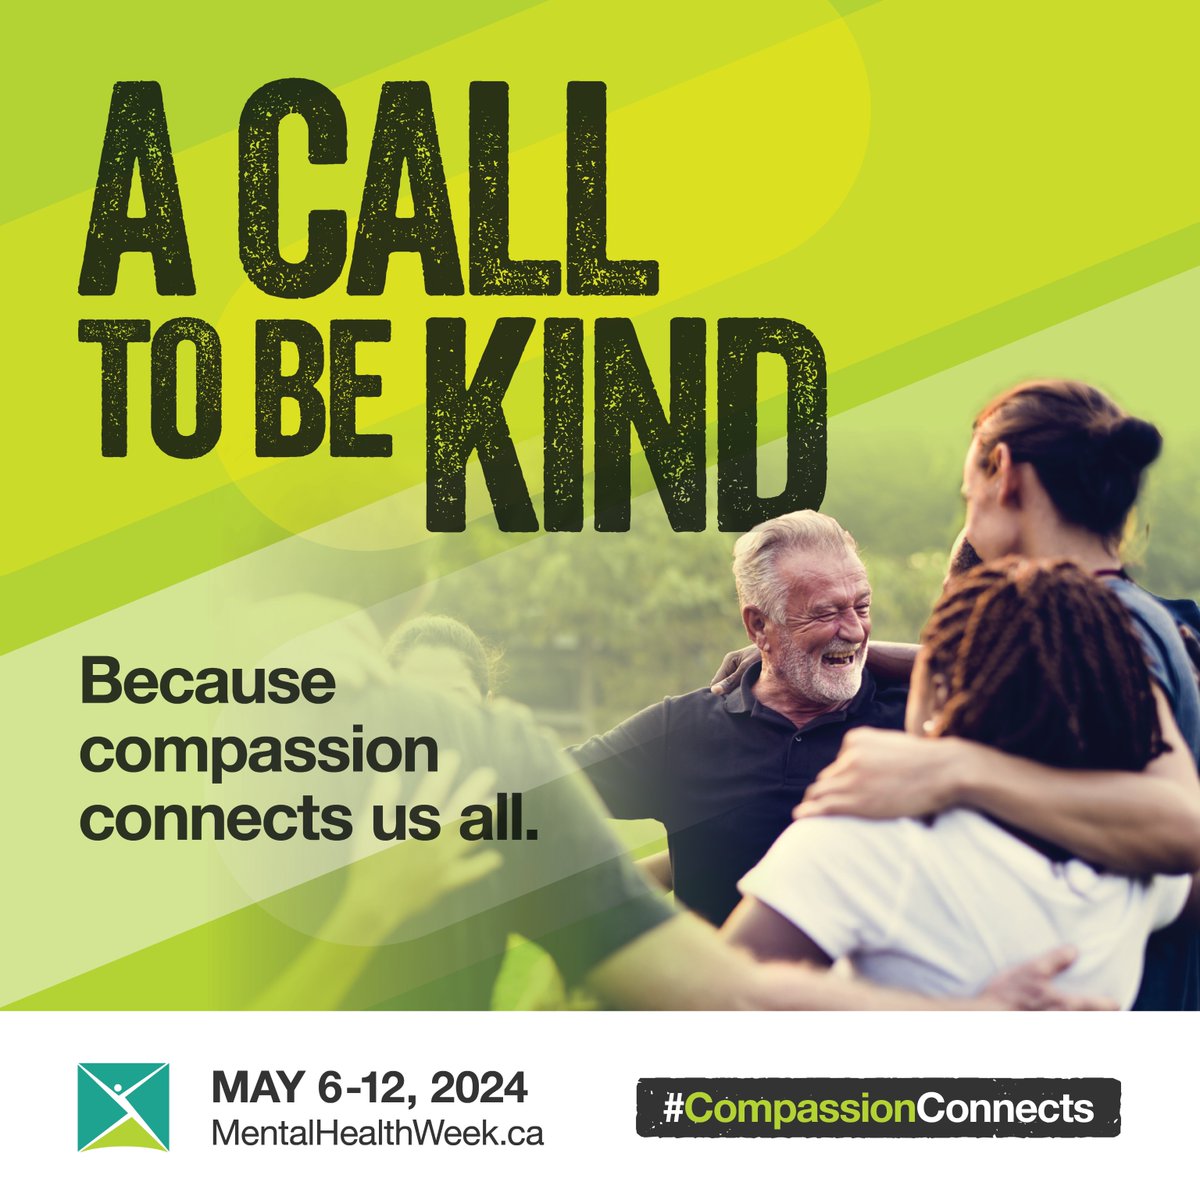 #DYK that giving compassion feels as good as receiving it! Researchers found that when we extend kindness, our bodies release oxytocin, the 'feel-good' hormone. Learn more at mentalhealth.ca #MentalHealthWeek #CompassionConnects